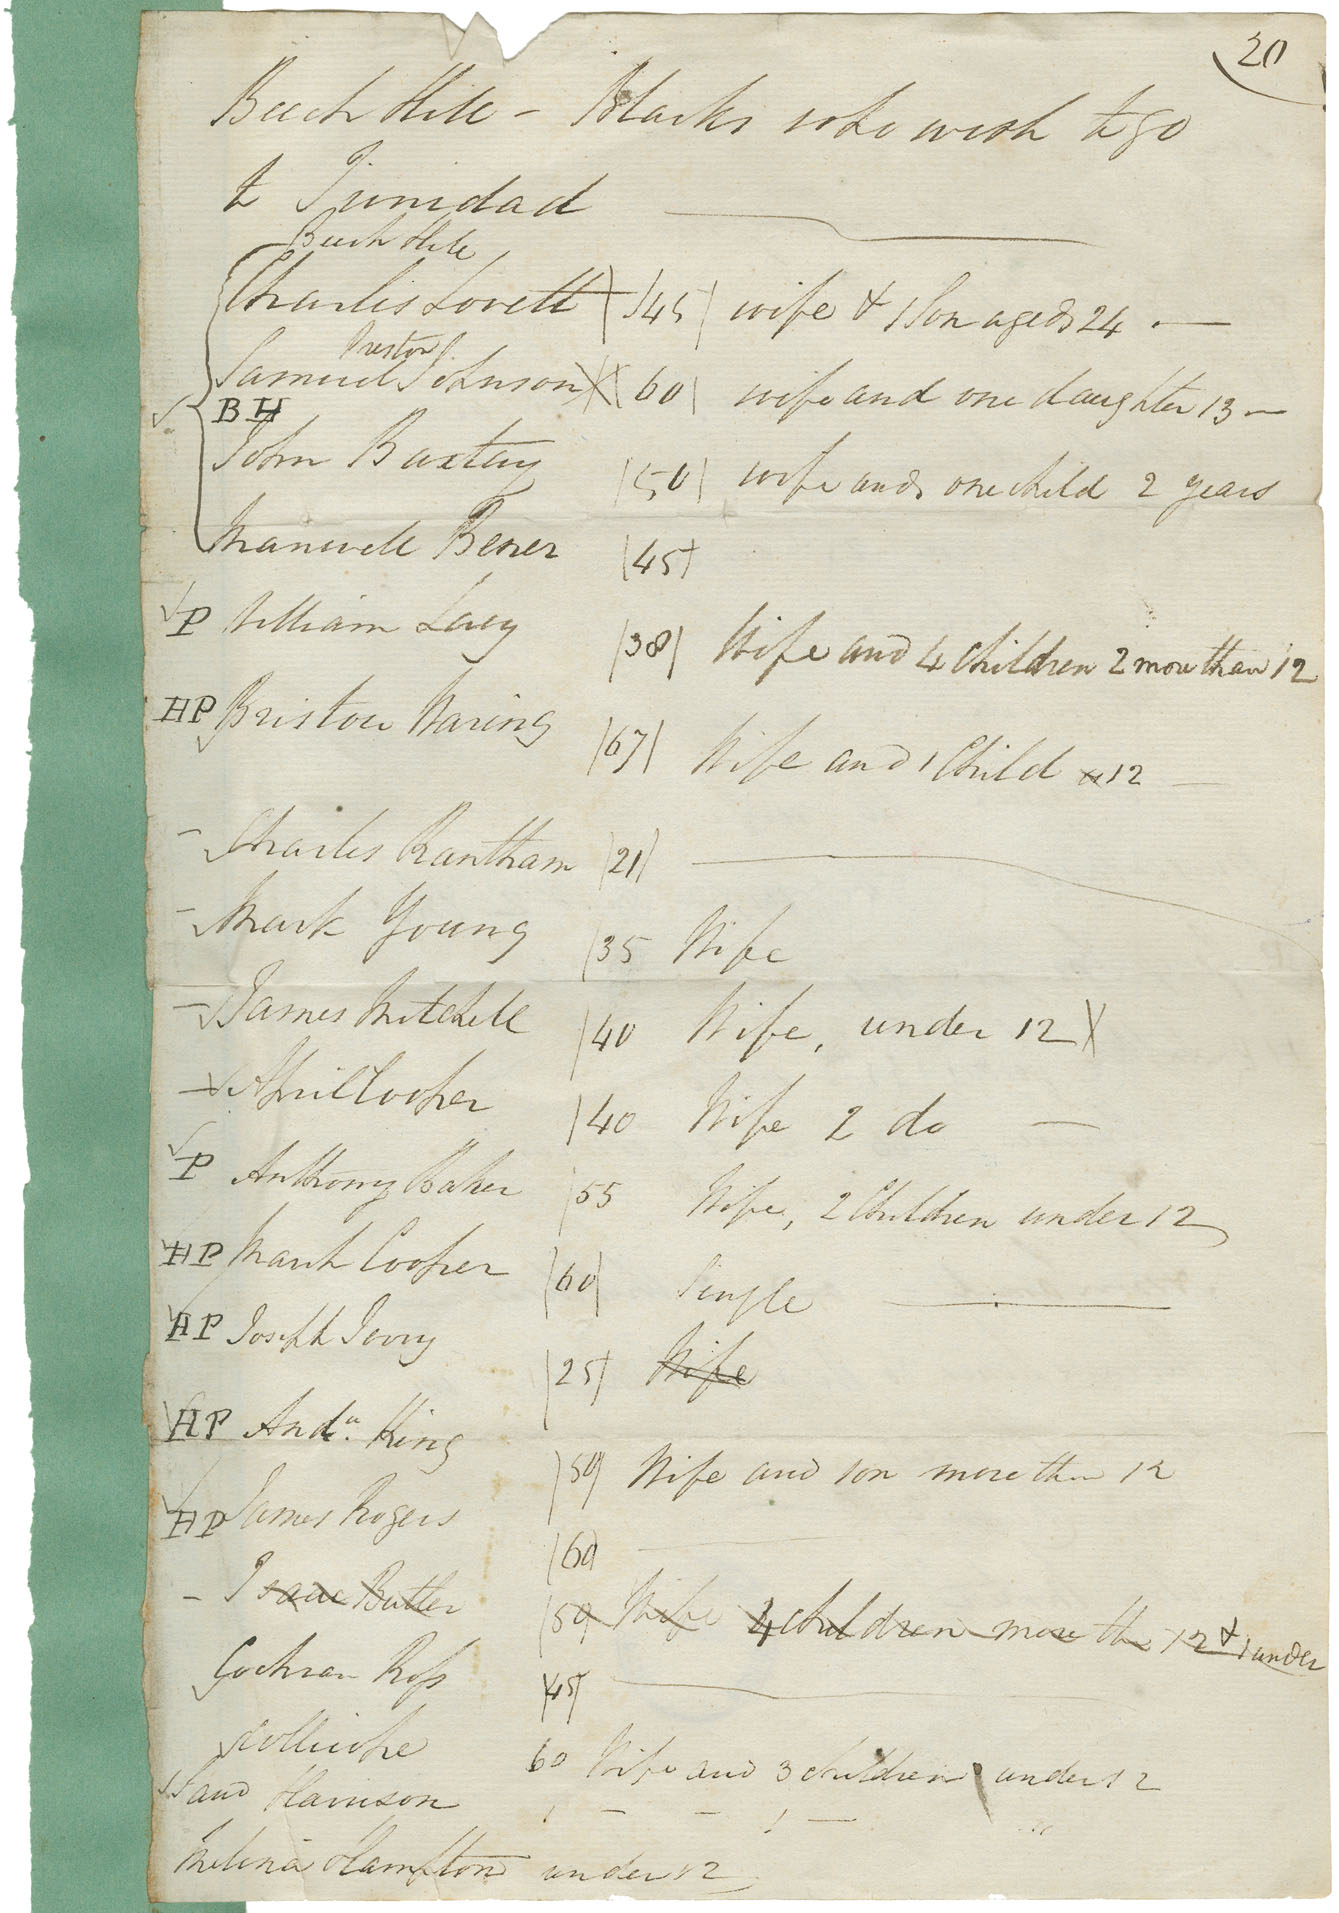 african-heritage : A list of Black Refugees at Beech Hill (Beechville) settlement who wished to go to Trinidad. No date